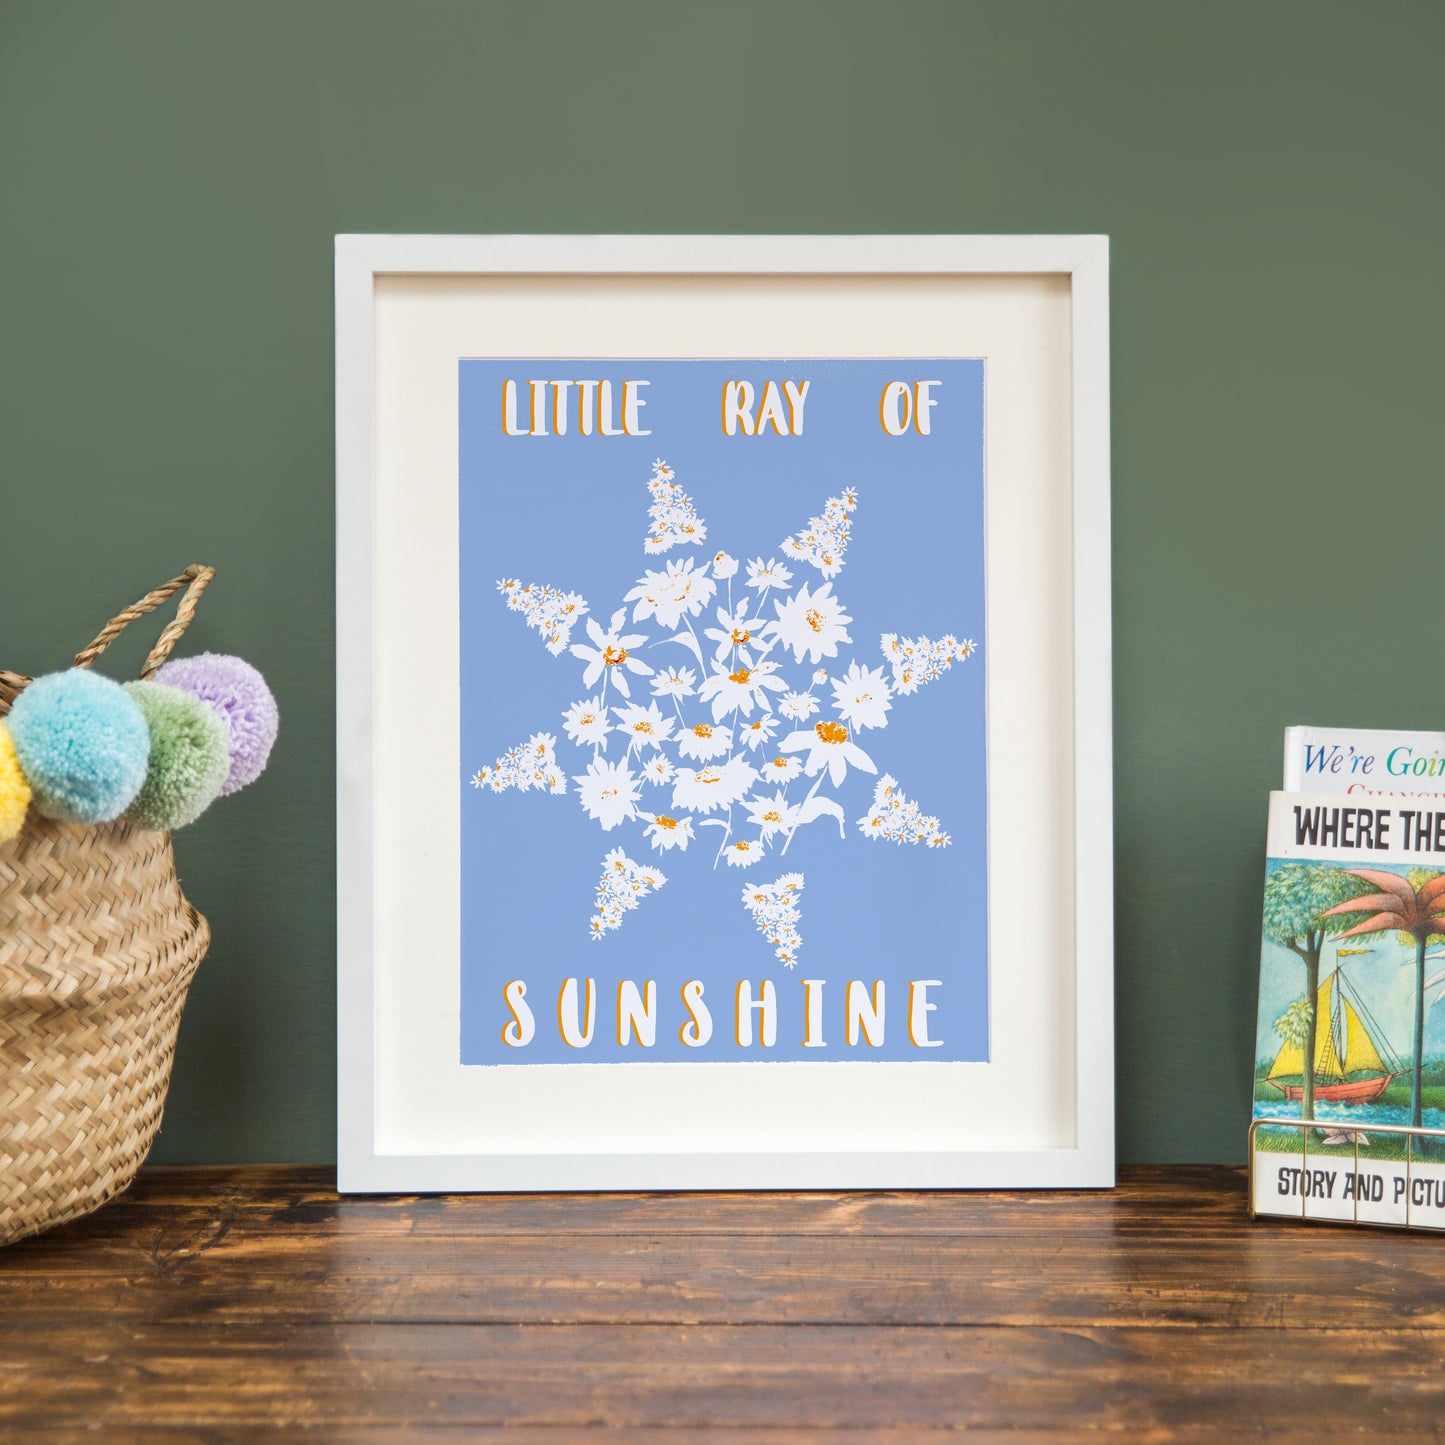 LITTLE RAY OF SUNSHINE A4 PRINT